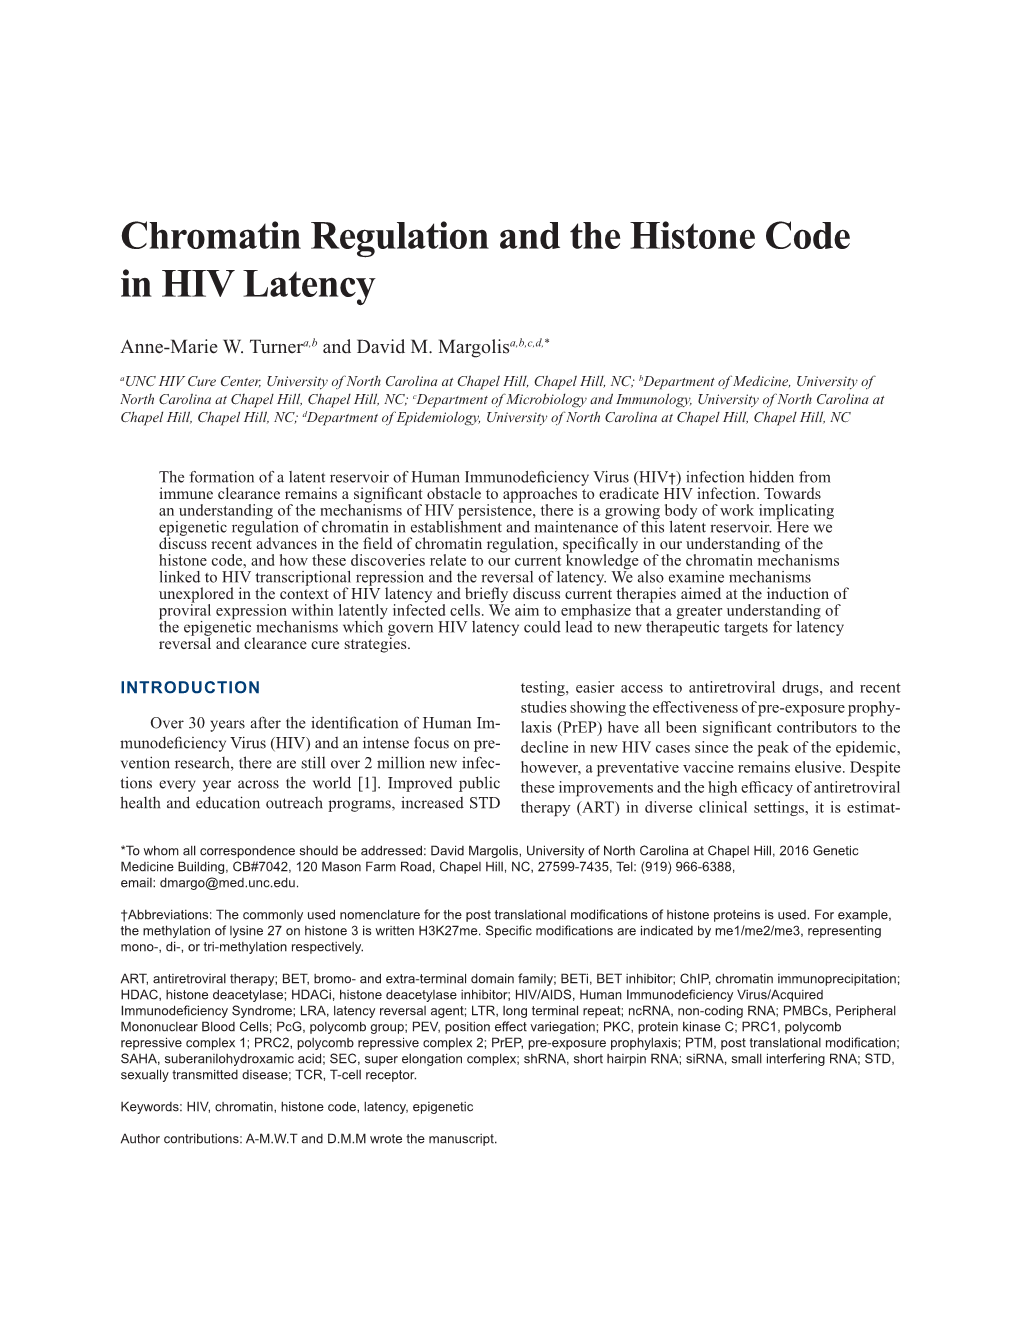 Chromatin Regulation and the Histone Code in HIV Latency